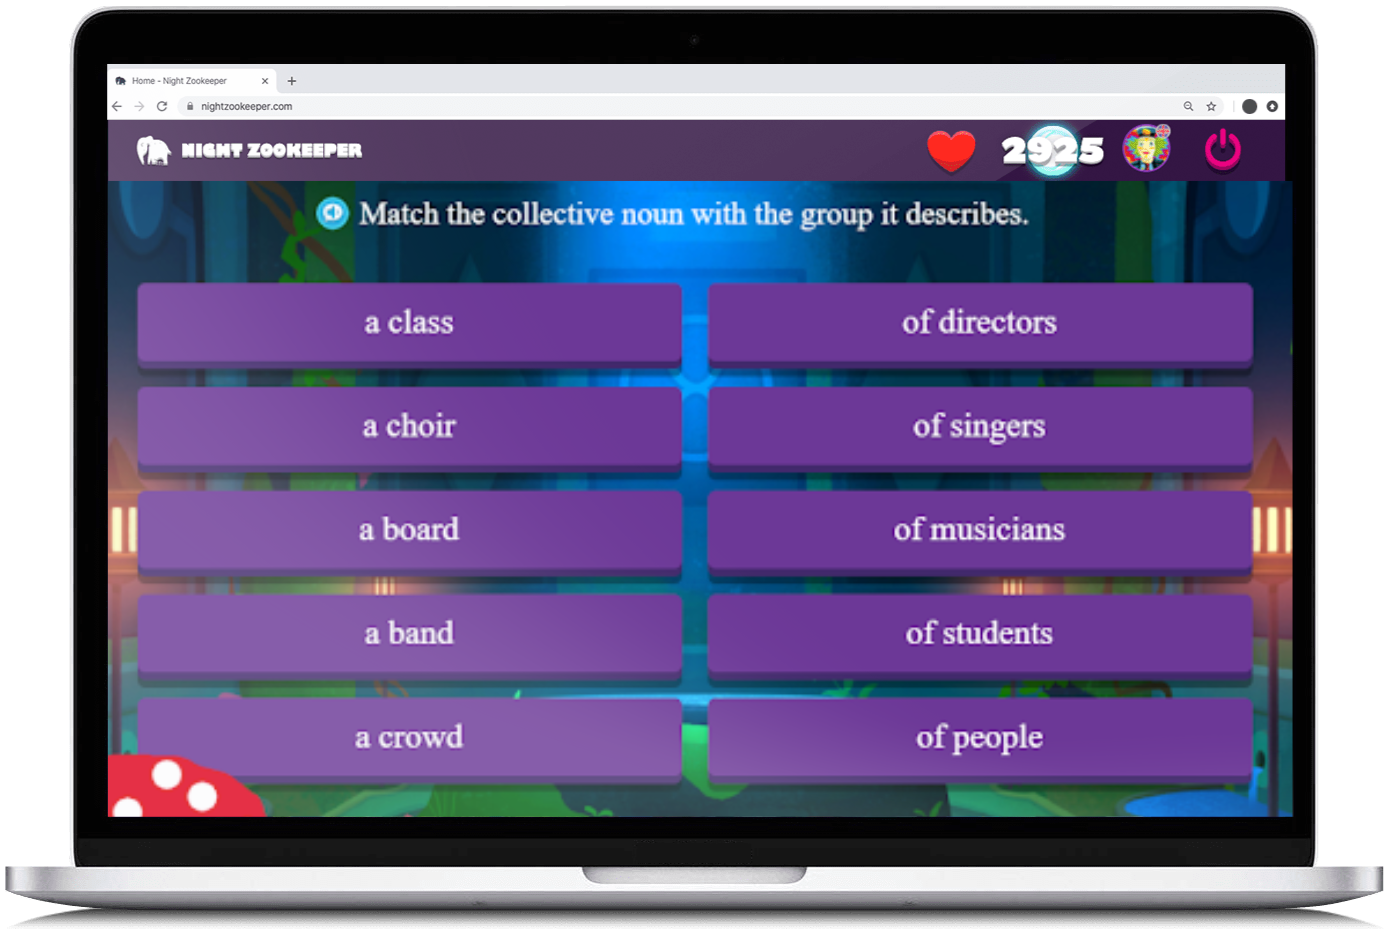 Collective nouns activity on Nightzookeeper.com, displayed on a laptop screen.